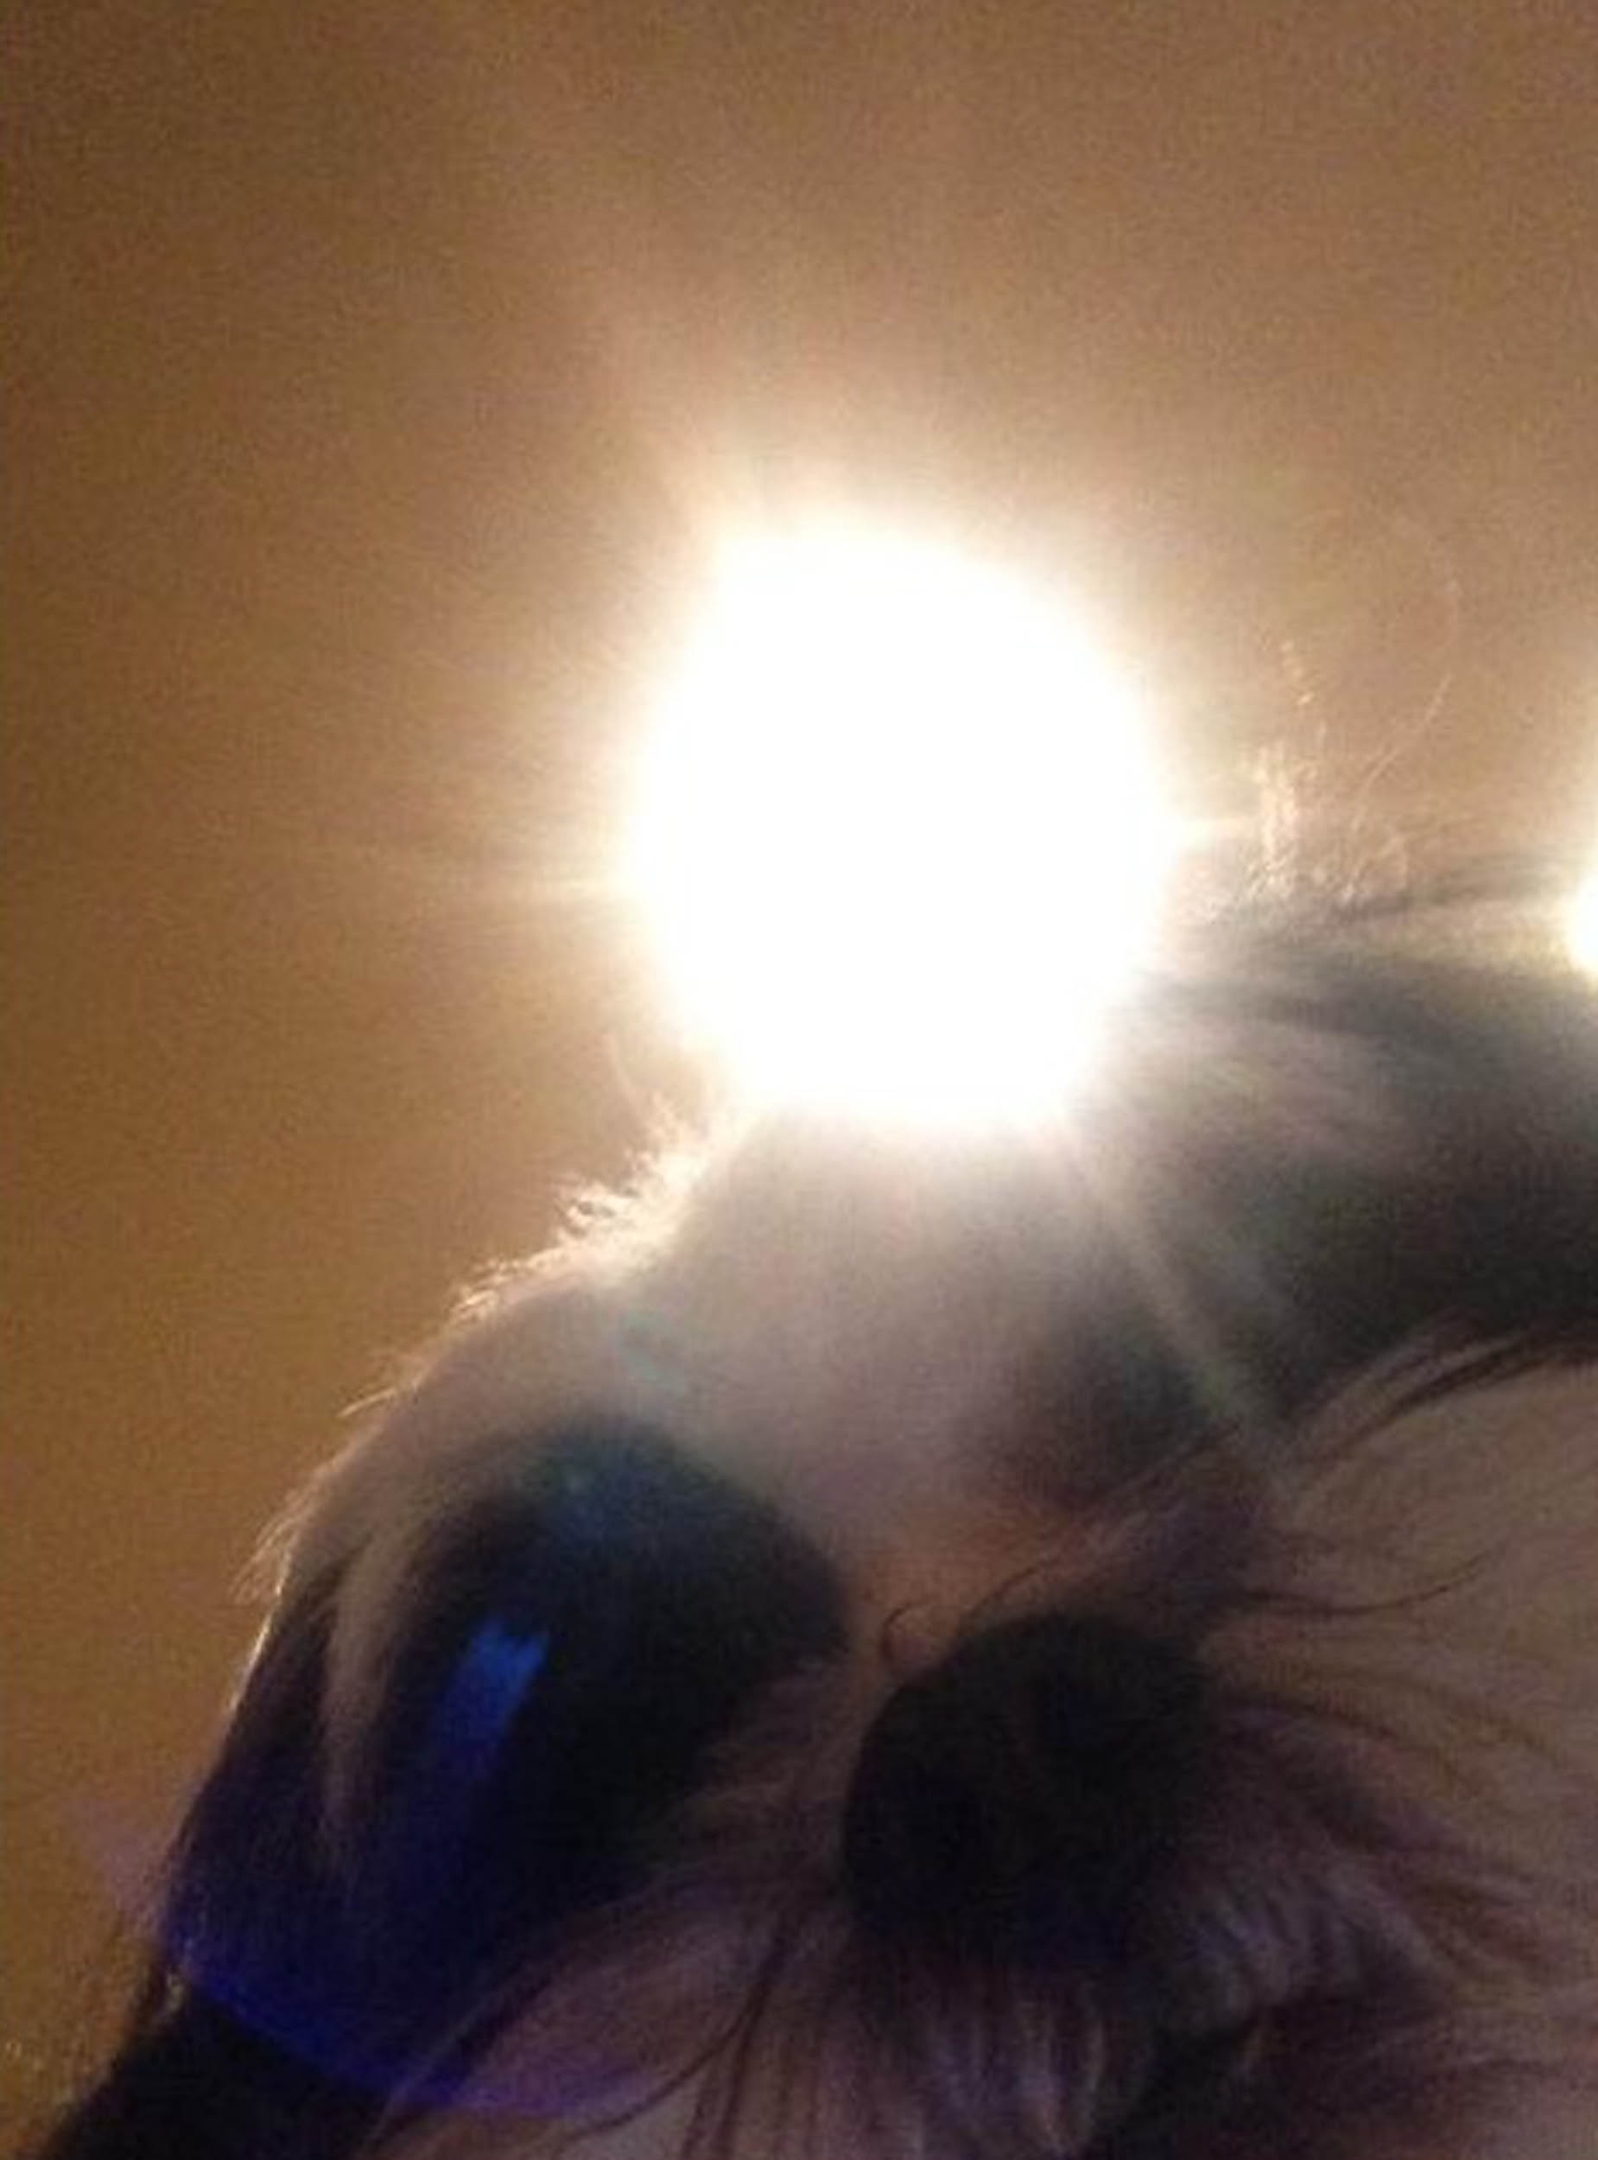 "The other day my dog stood on my phone and took a few selfies" PETS across the globe are getting in on the selfie phenomenon. Curious cats, dopey dogs and even ham-fisted hamsters are snapping themselves on their owners mobiles - with hilarious results. The pictures, which include a close-up of a one-eyed cat, all were produced when clumsy pets stood on their owners phones or iPads. The results are varied - some pictures show cats looking down into the camera with their chin appearing extremely enlarged, and in others a dogs nose takes up most of the photo.